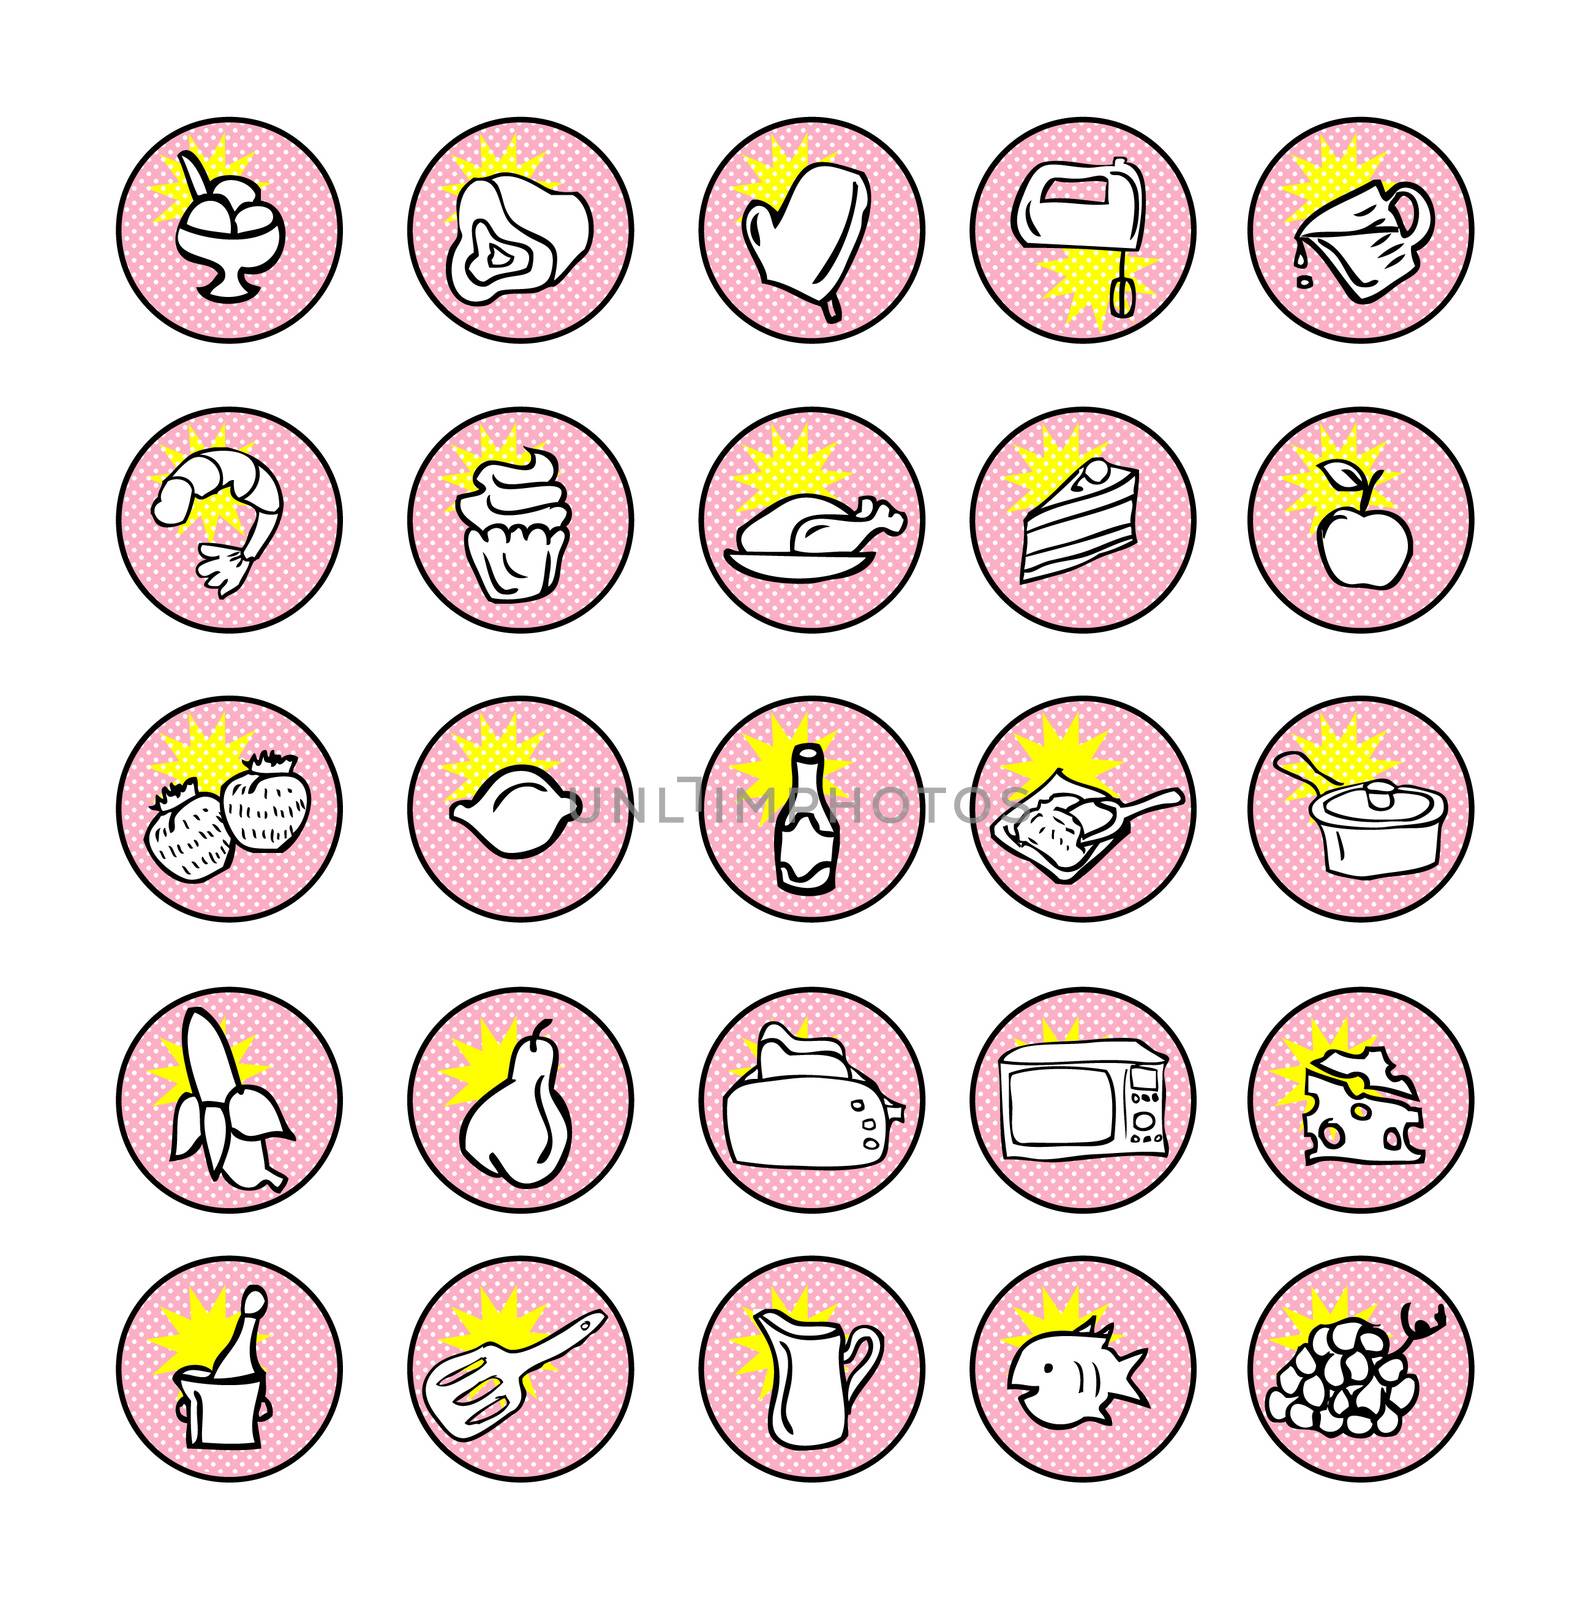 Food Icons and kitchen tools for cooking comic book style by IconsJewelry